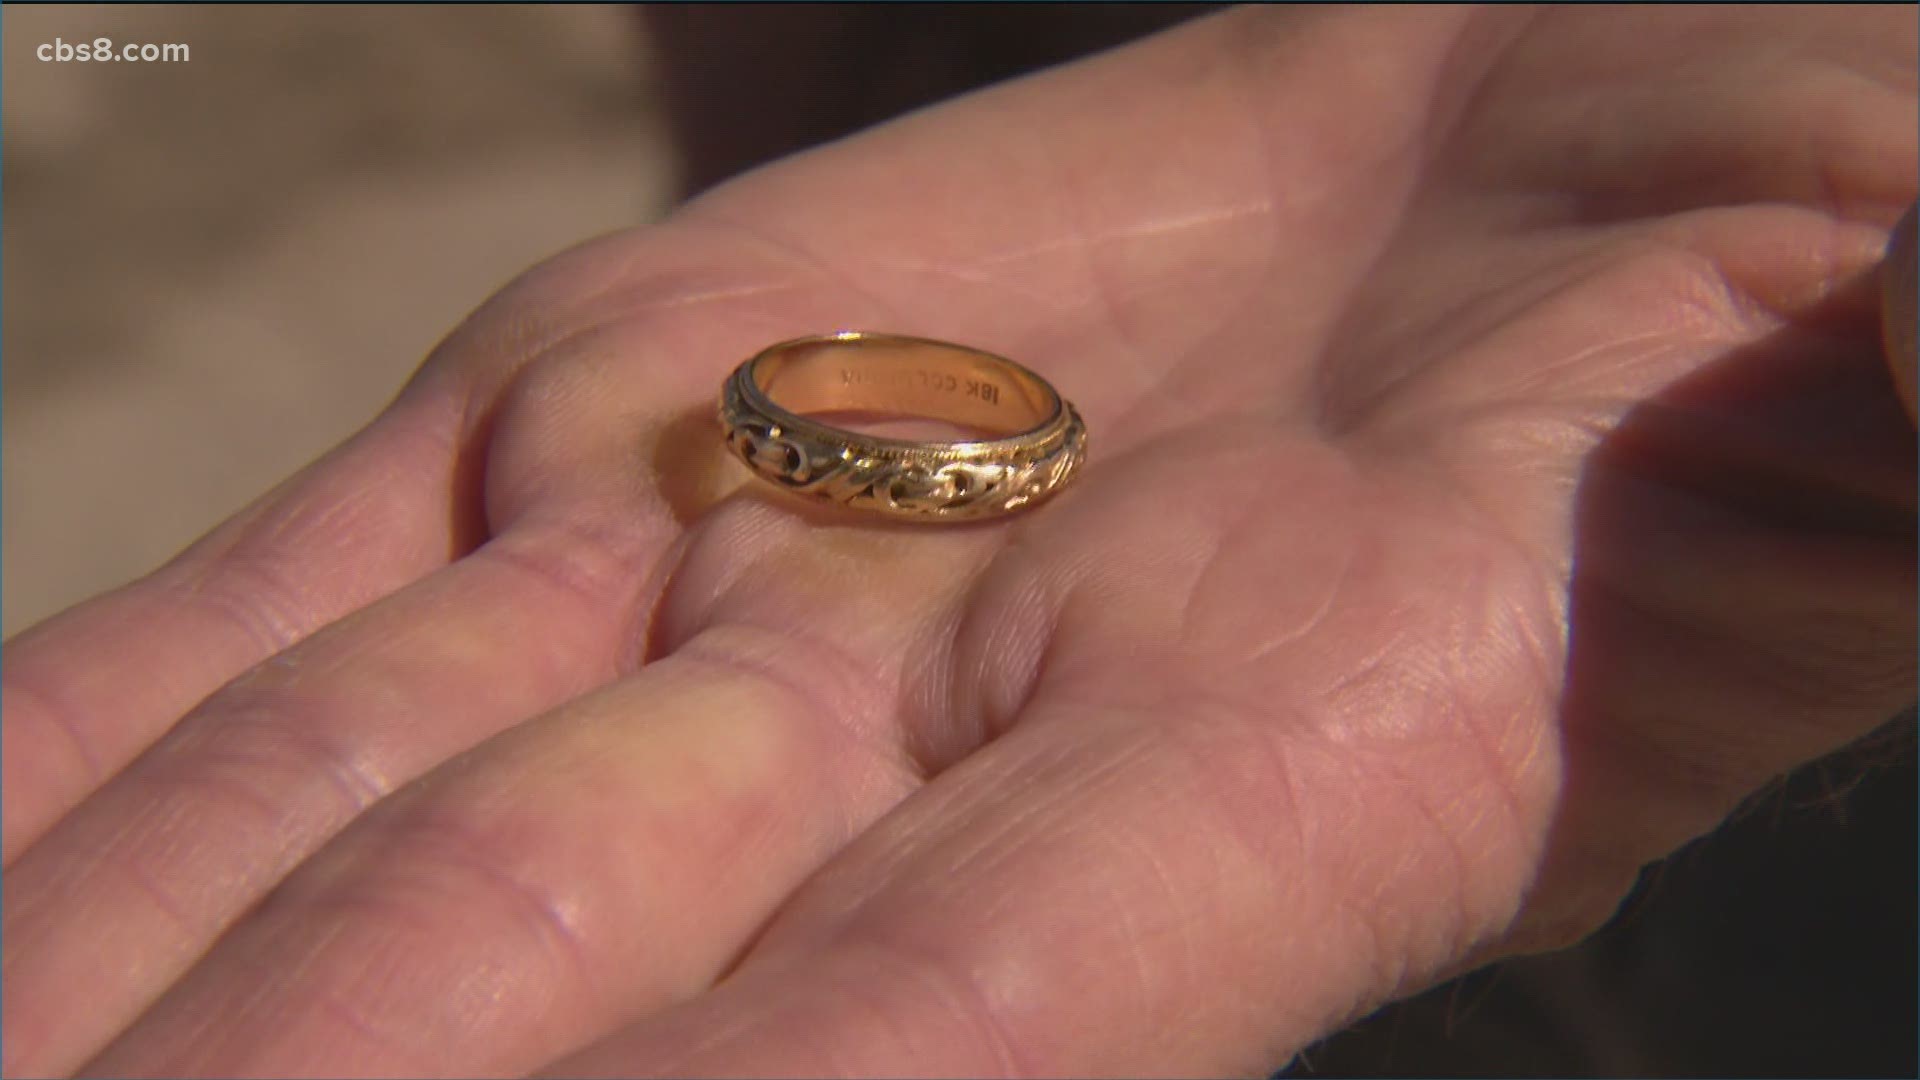 San Diego diver finds lost wedding ring